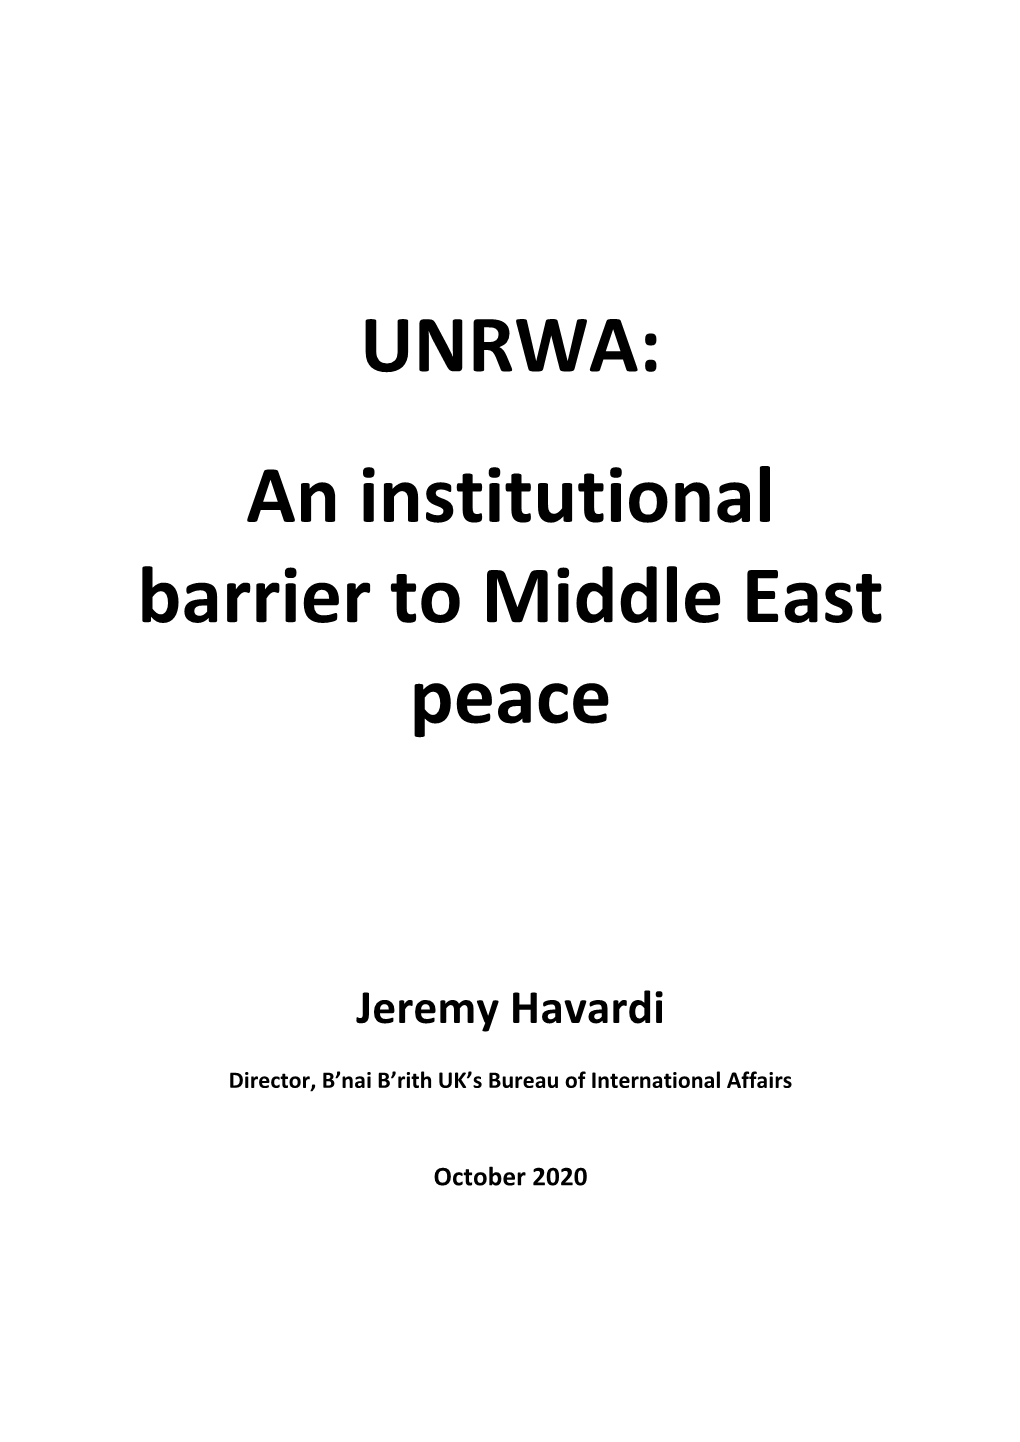 UNRWA: an Institutional Barrier to Middle East Peace